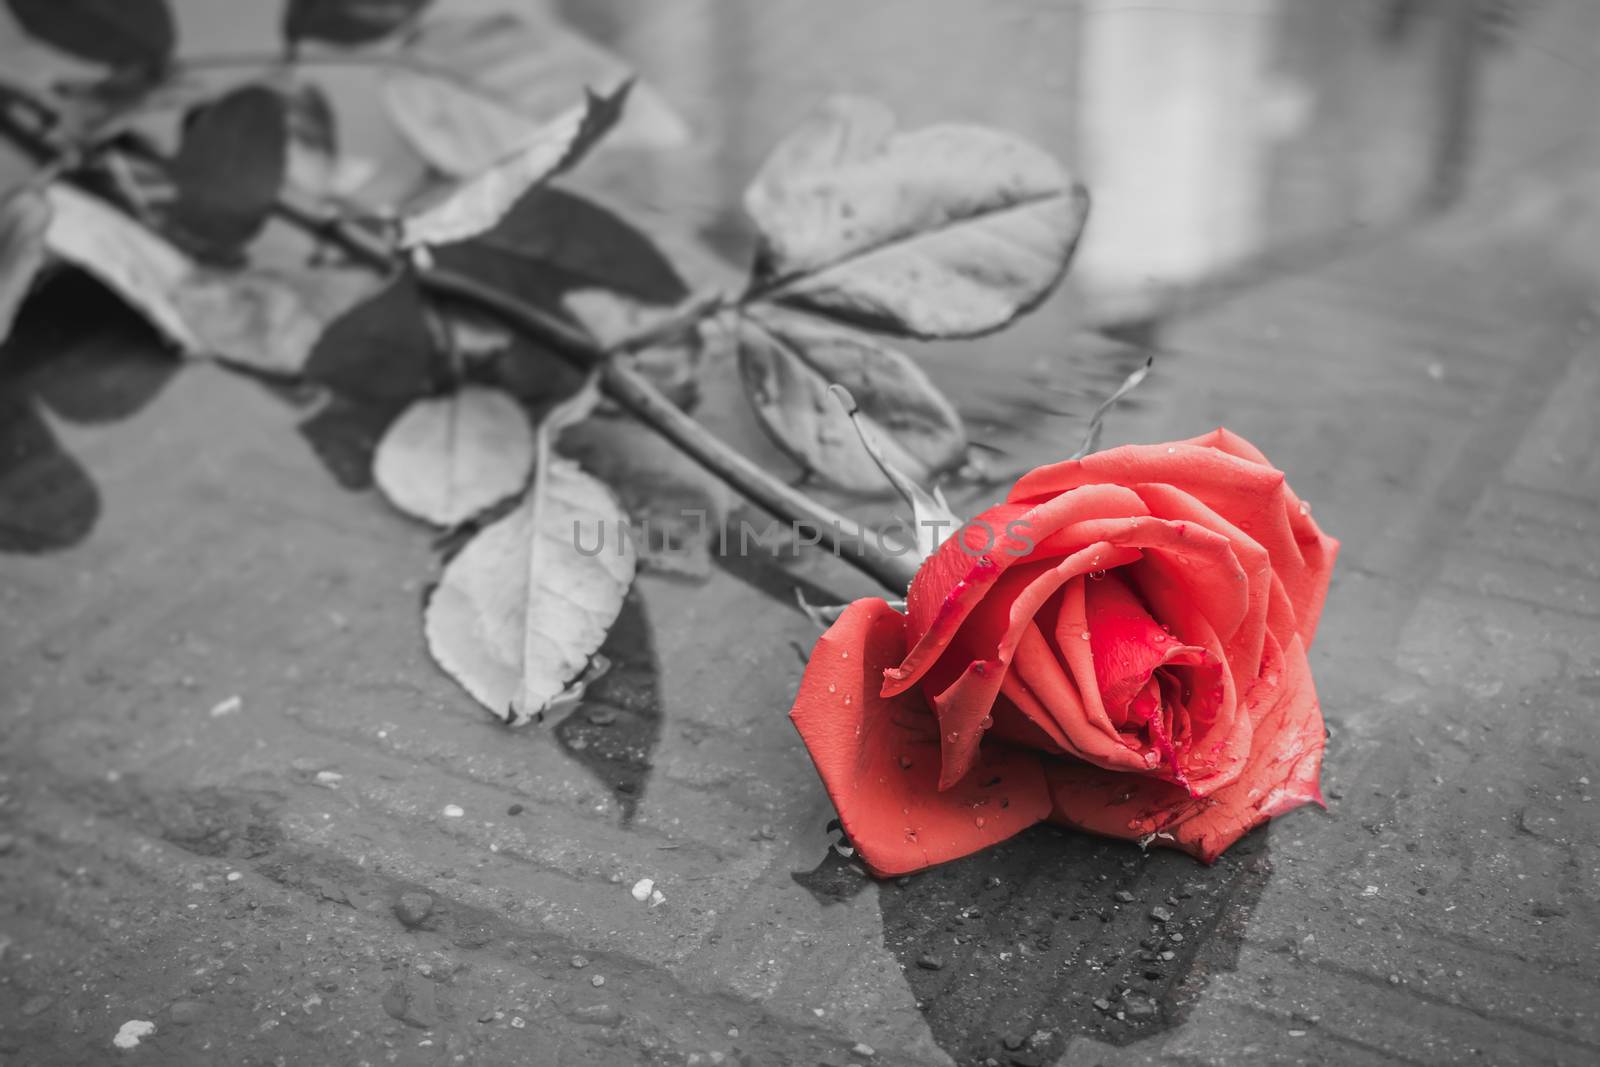 A red rose lies in a dirty puddle on the road, thrown by someone after the rain by Skaron